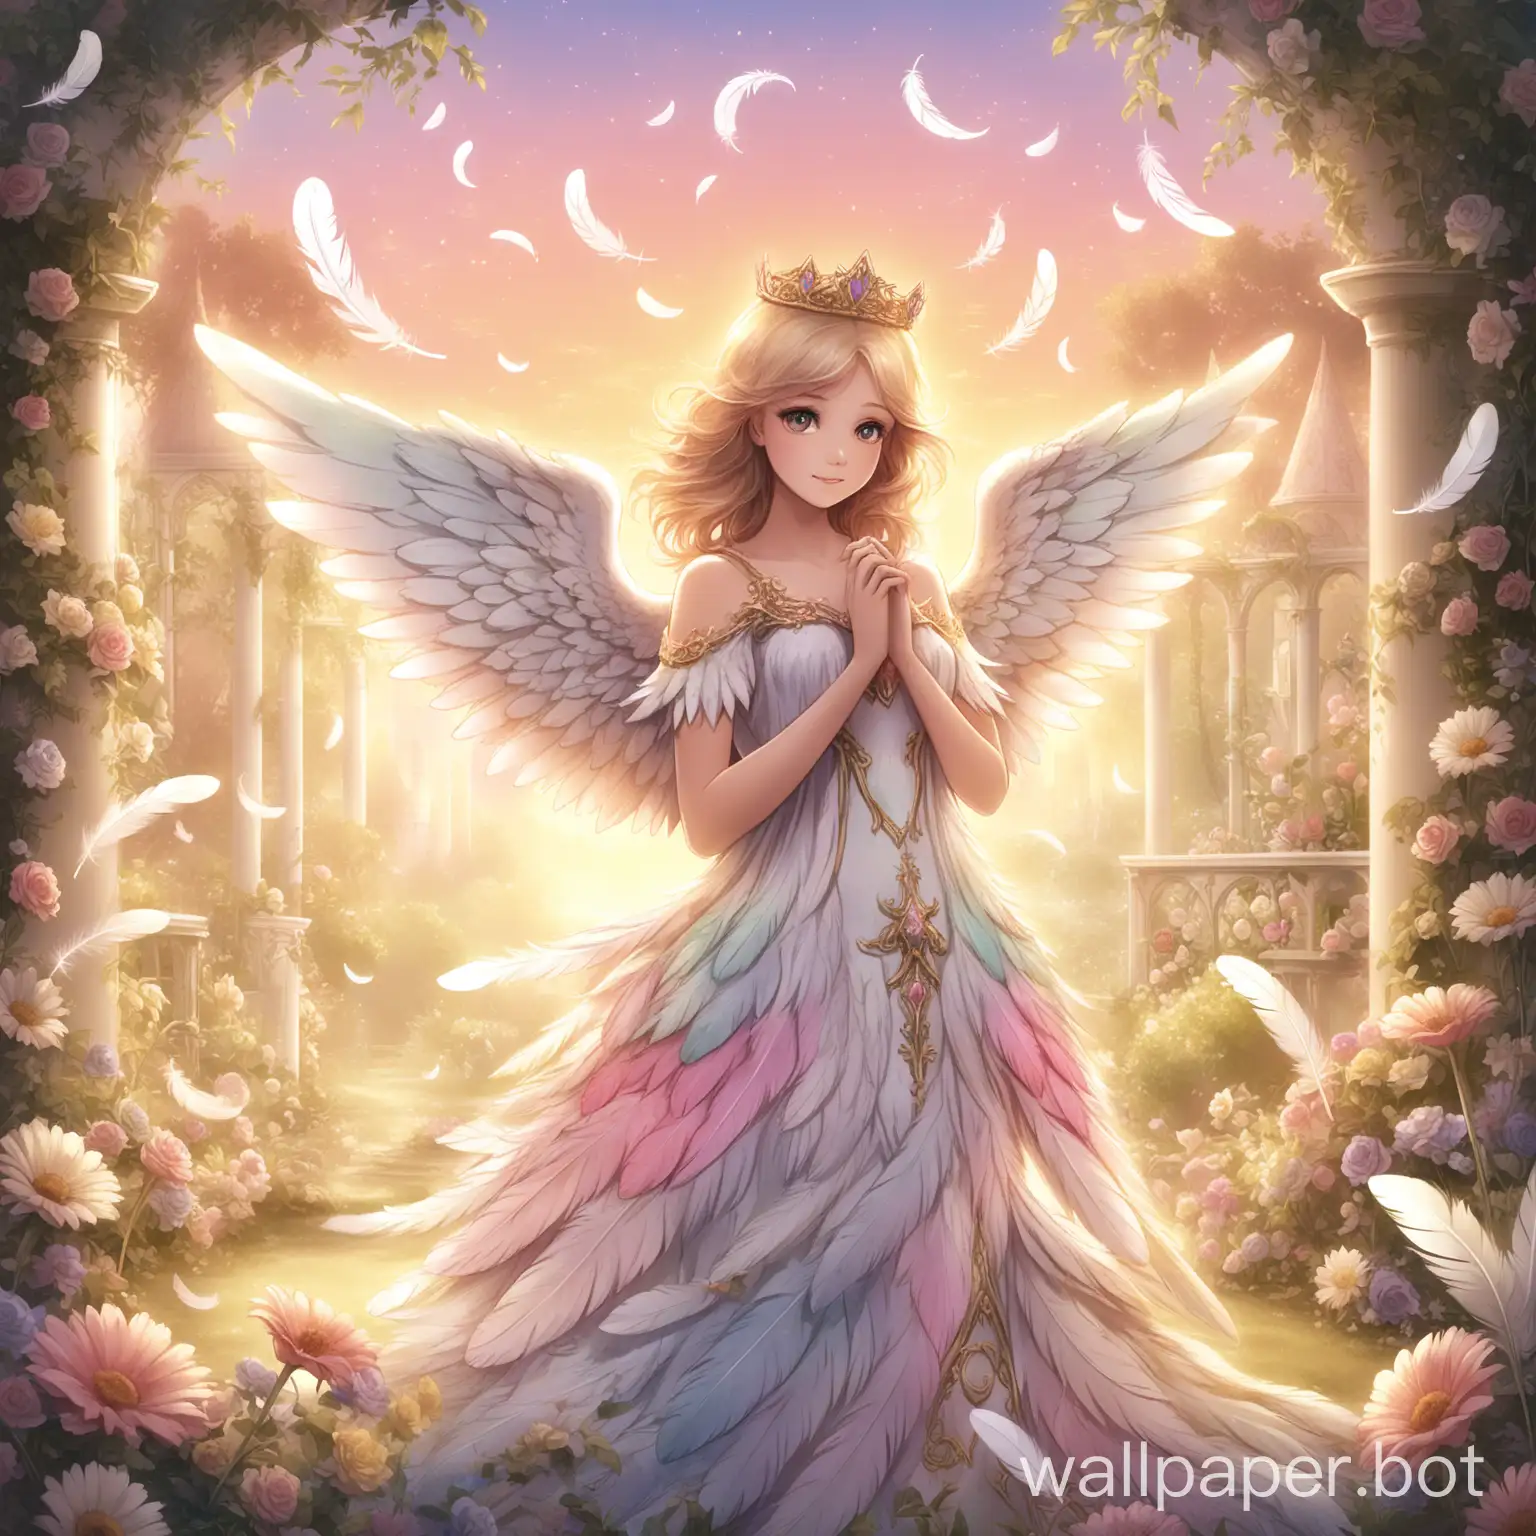 Princess-in-a-Garden-with-Angel-Feathers-at-Dawn